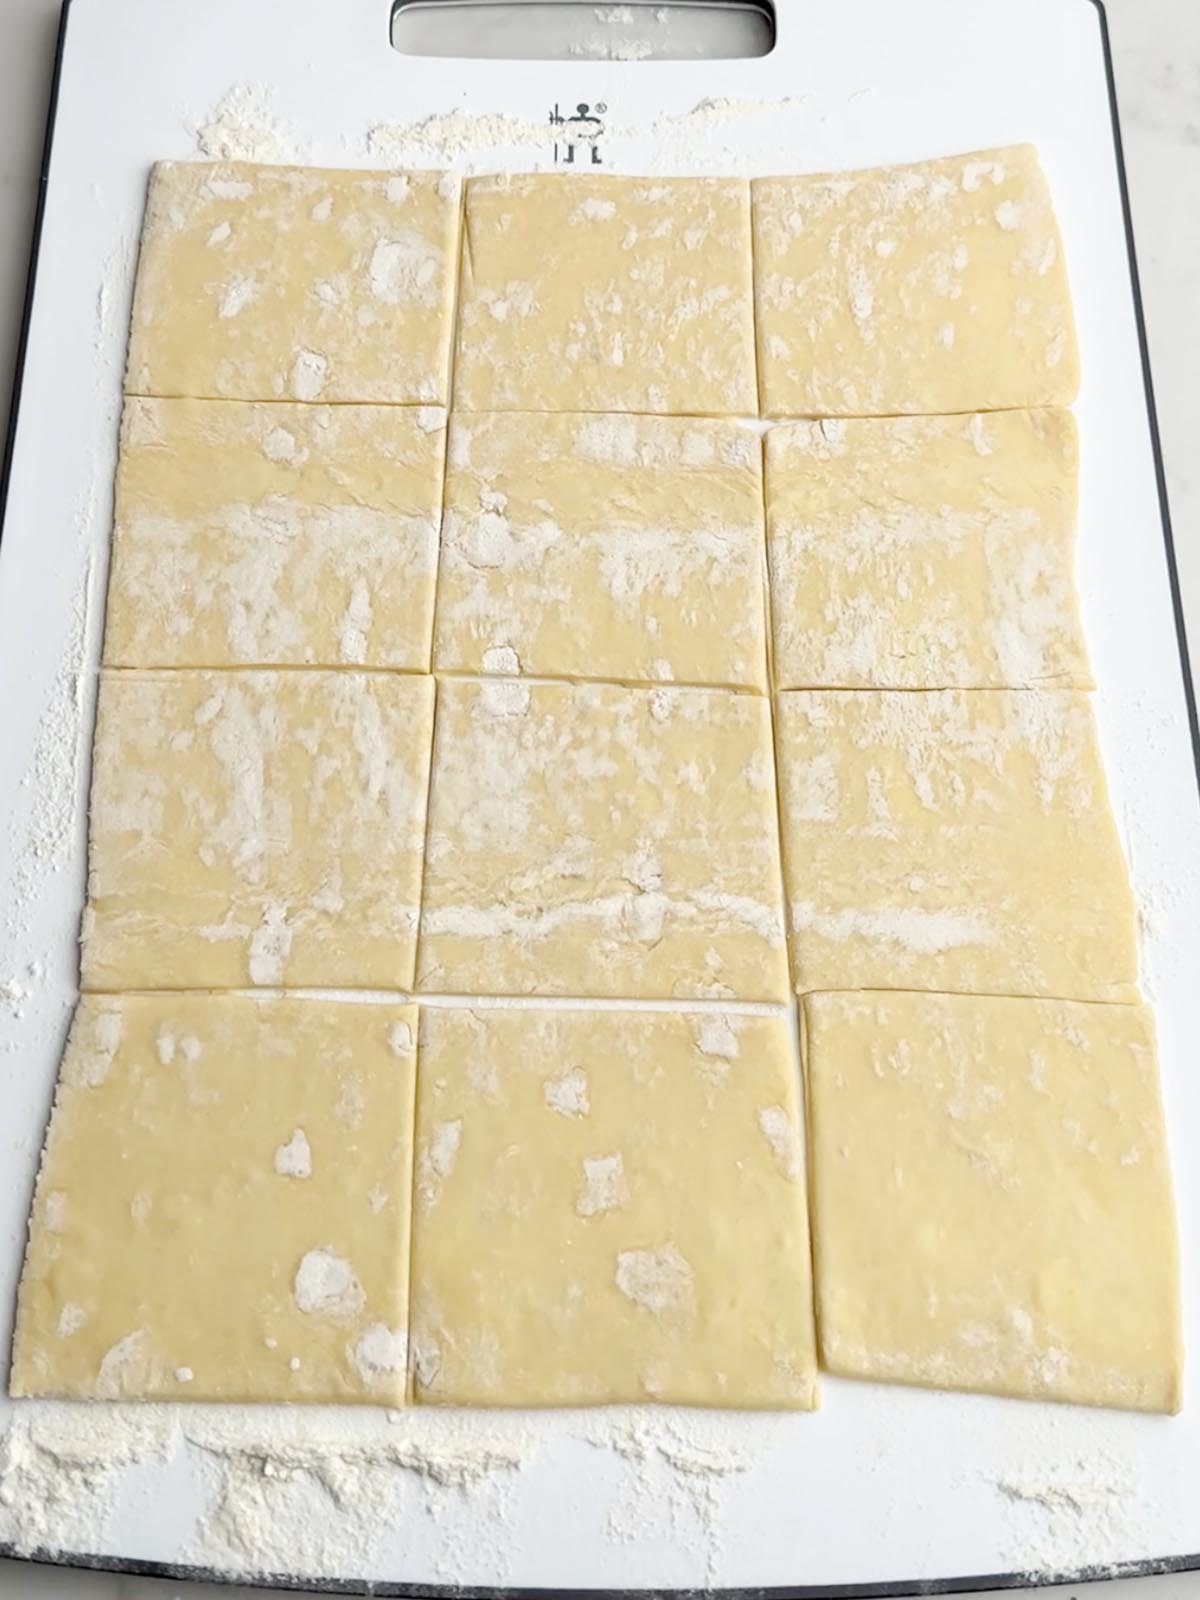 puff pastry sheet cut into 12 squares